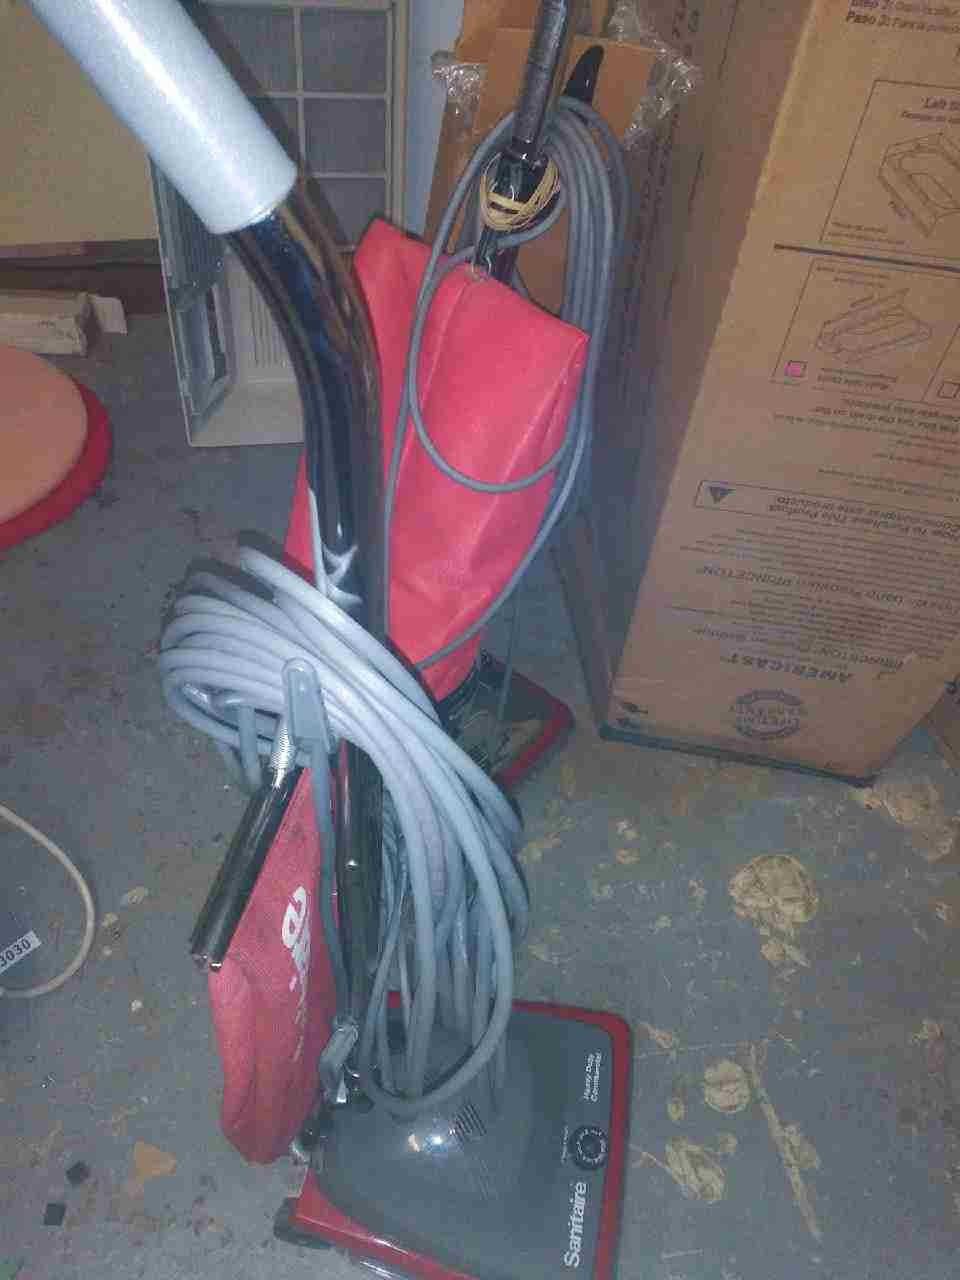 I got two commercial vacuum cleaners one cost 289 $ both need belts price negotiable